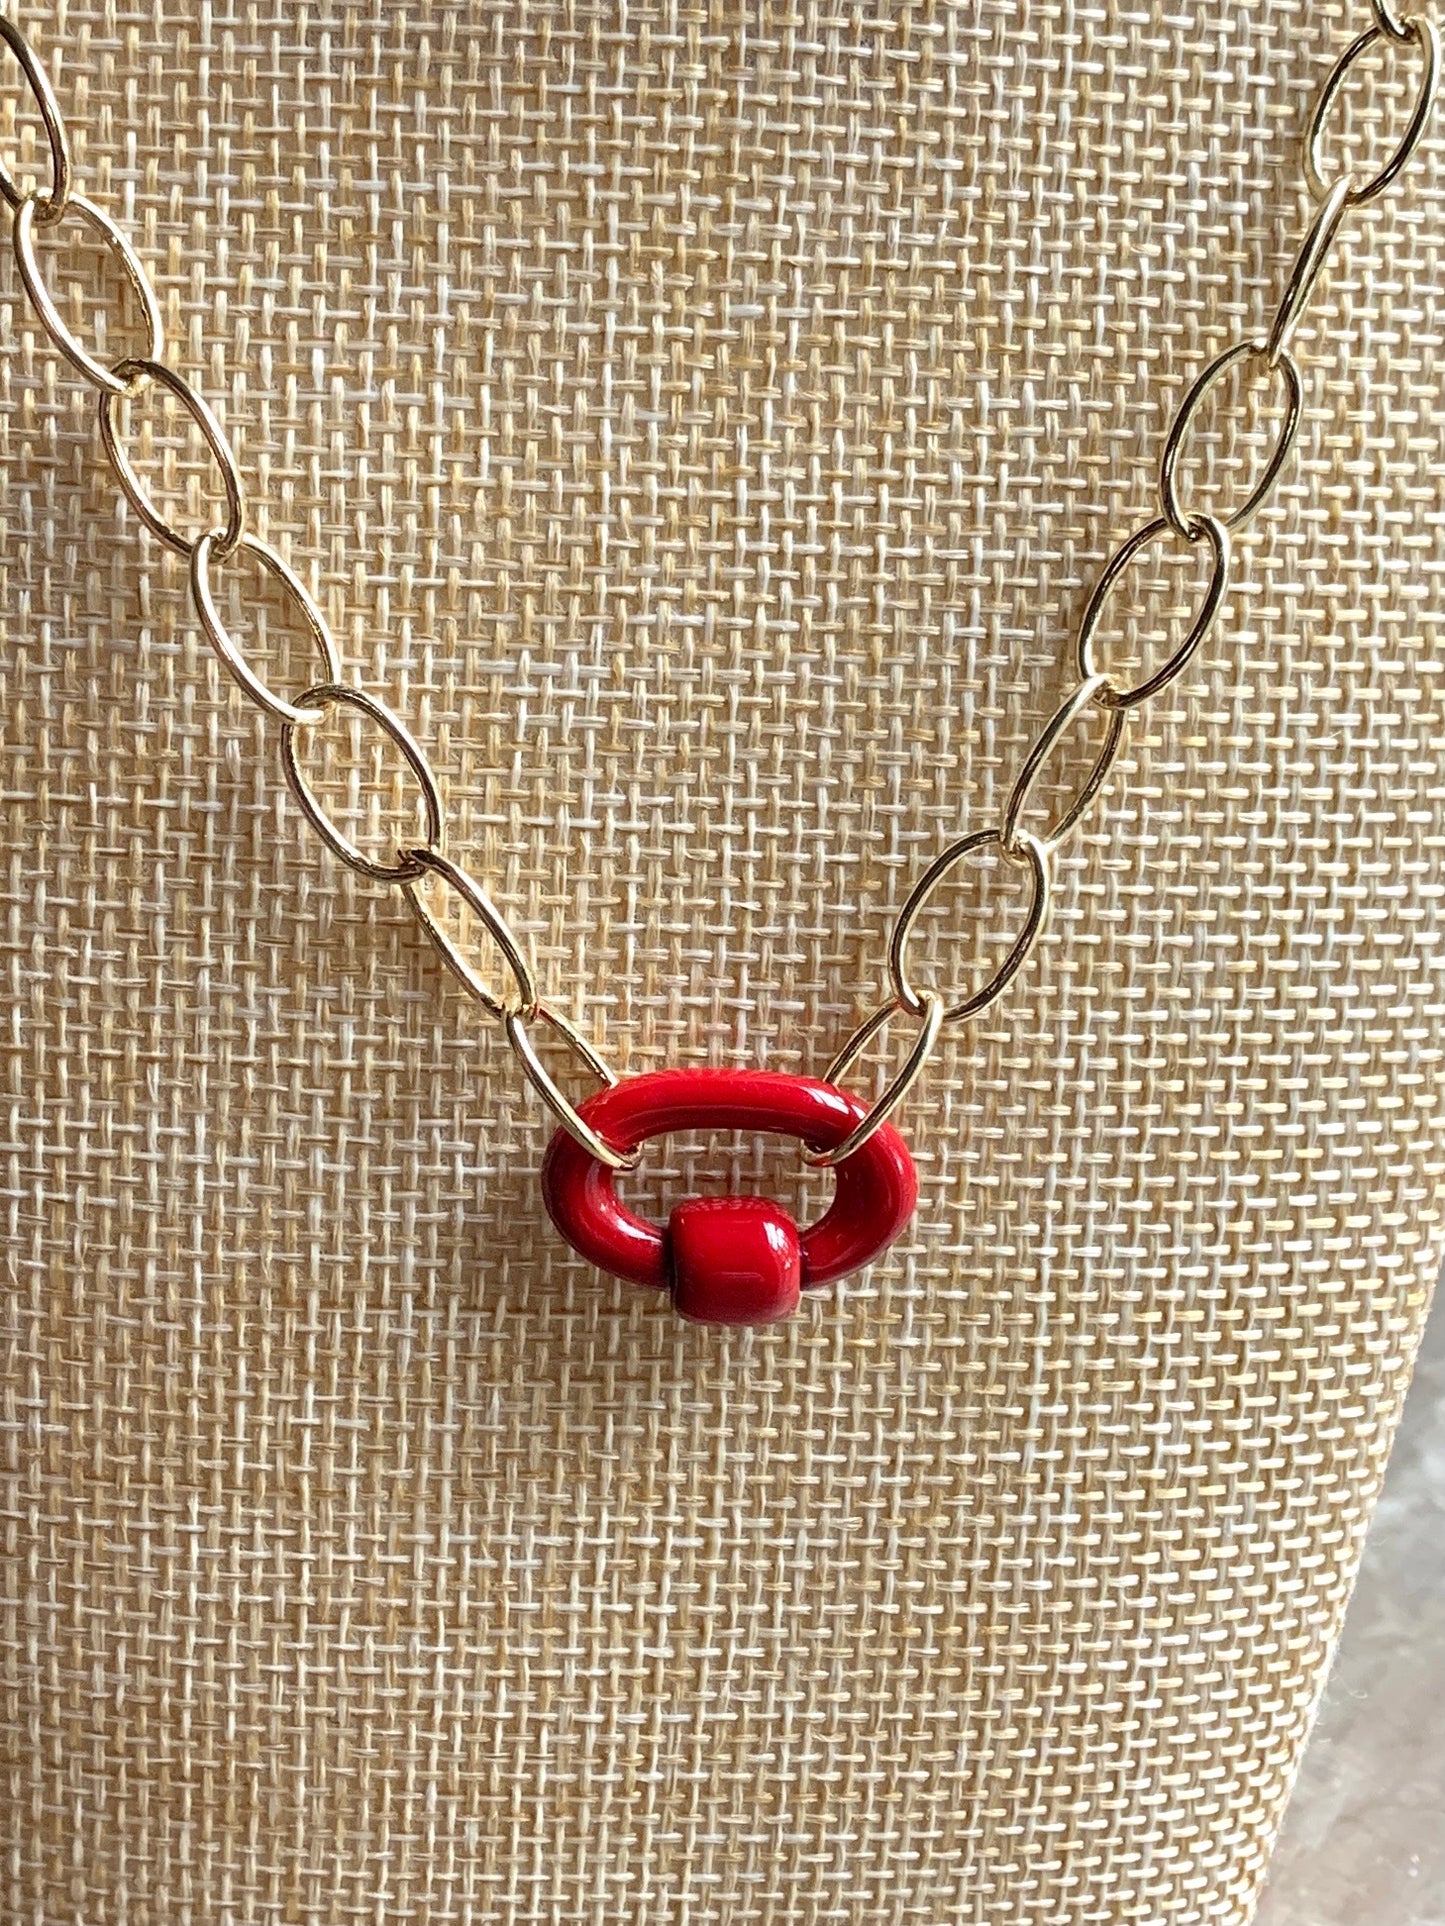 Gold Filled Chainlink Necklace with Red Carabiner